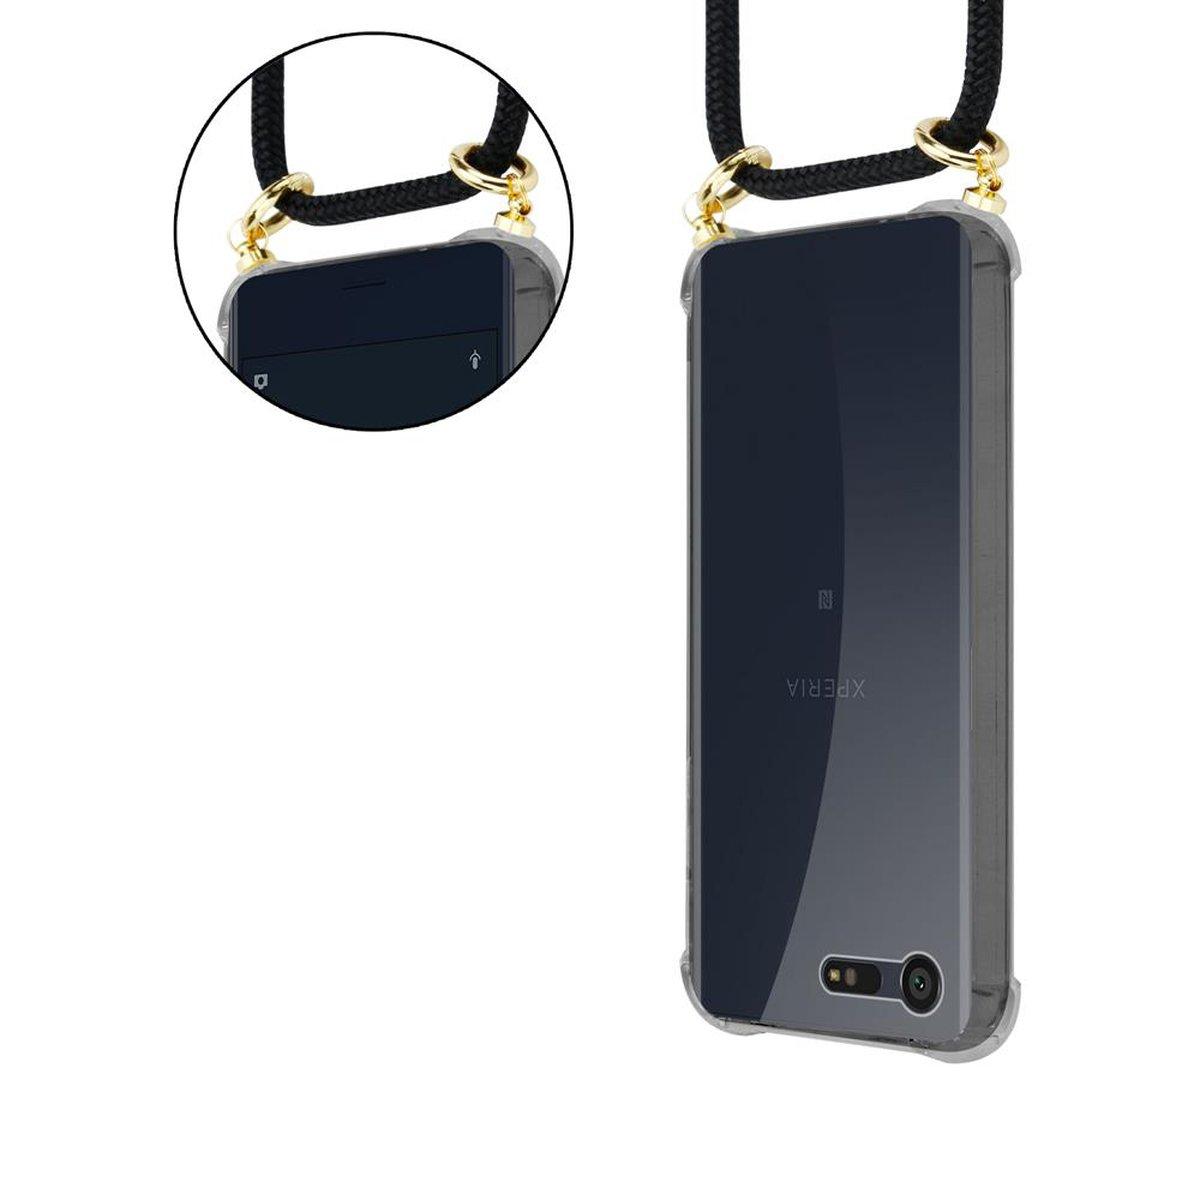 abnehmbarer X Backcover, Xperia COMPACT, Handy CADORABO Kordel Hülle, mit Kette und Band SCHWARZ Sony, Gold Ringen,